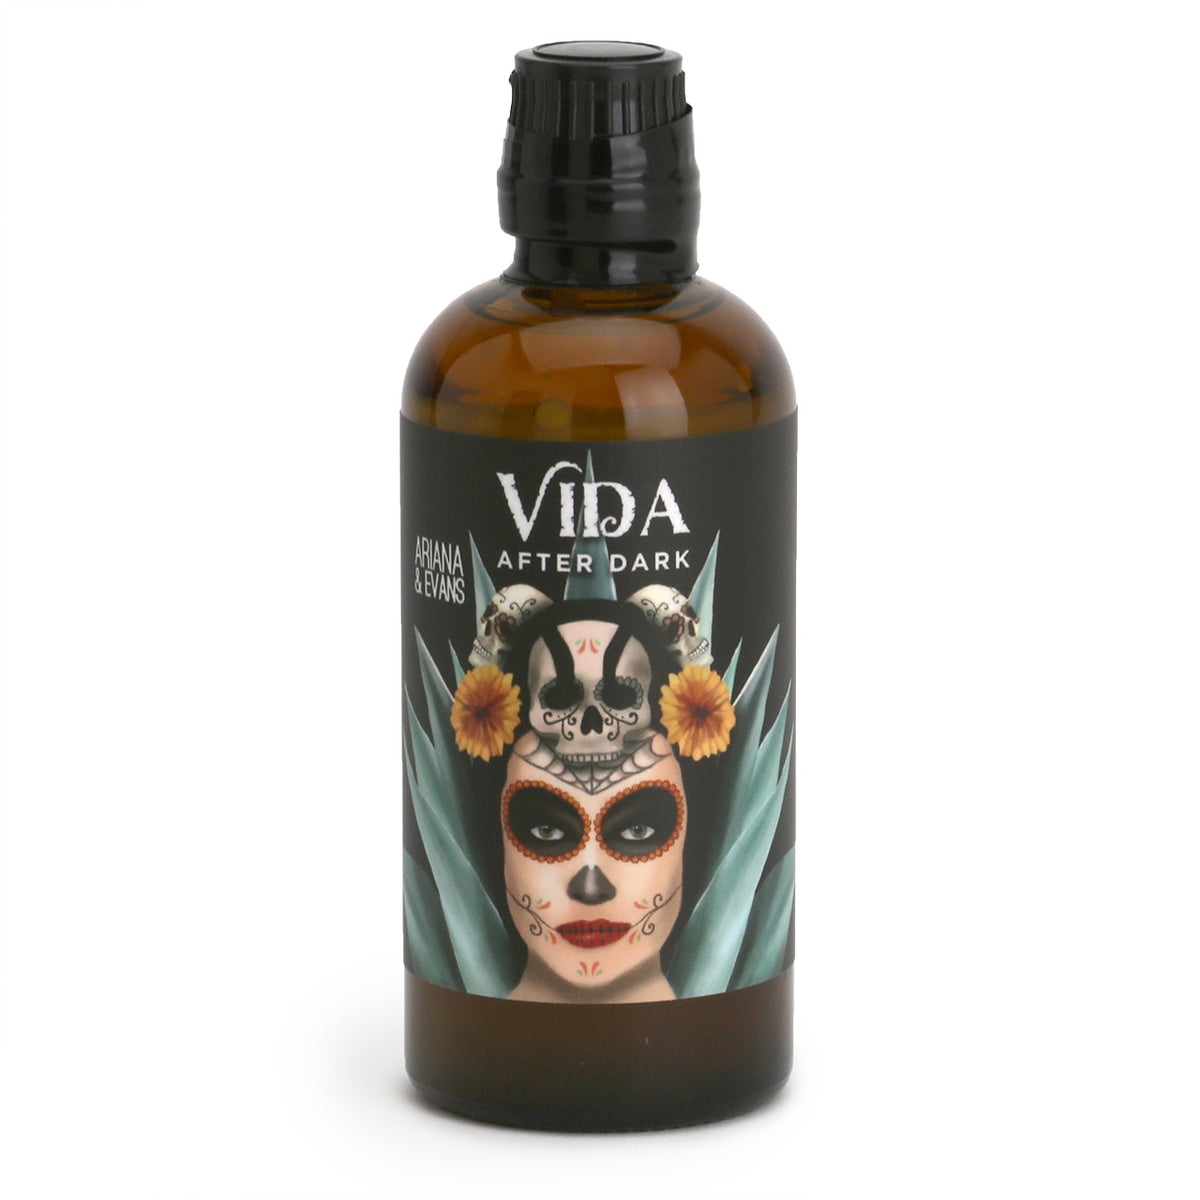 Amber bottle with woman&#39;s painted face on the label for Ariana &amp; Evans Vida After Dark After Shave Splash Skinfood 